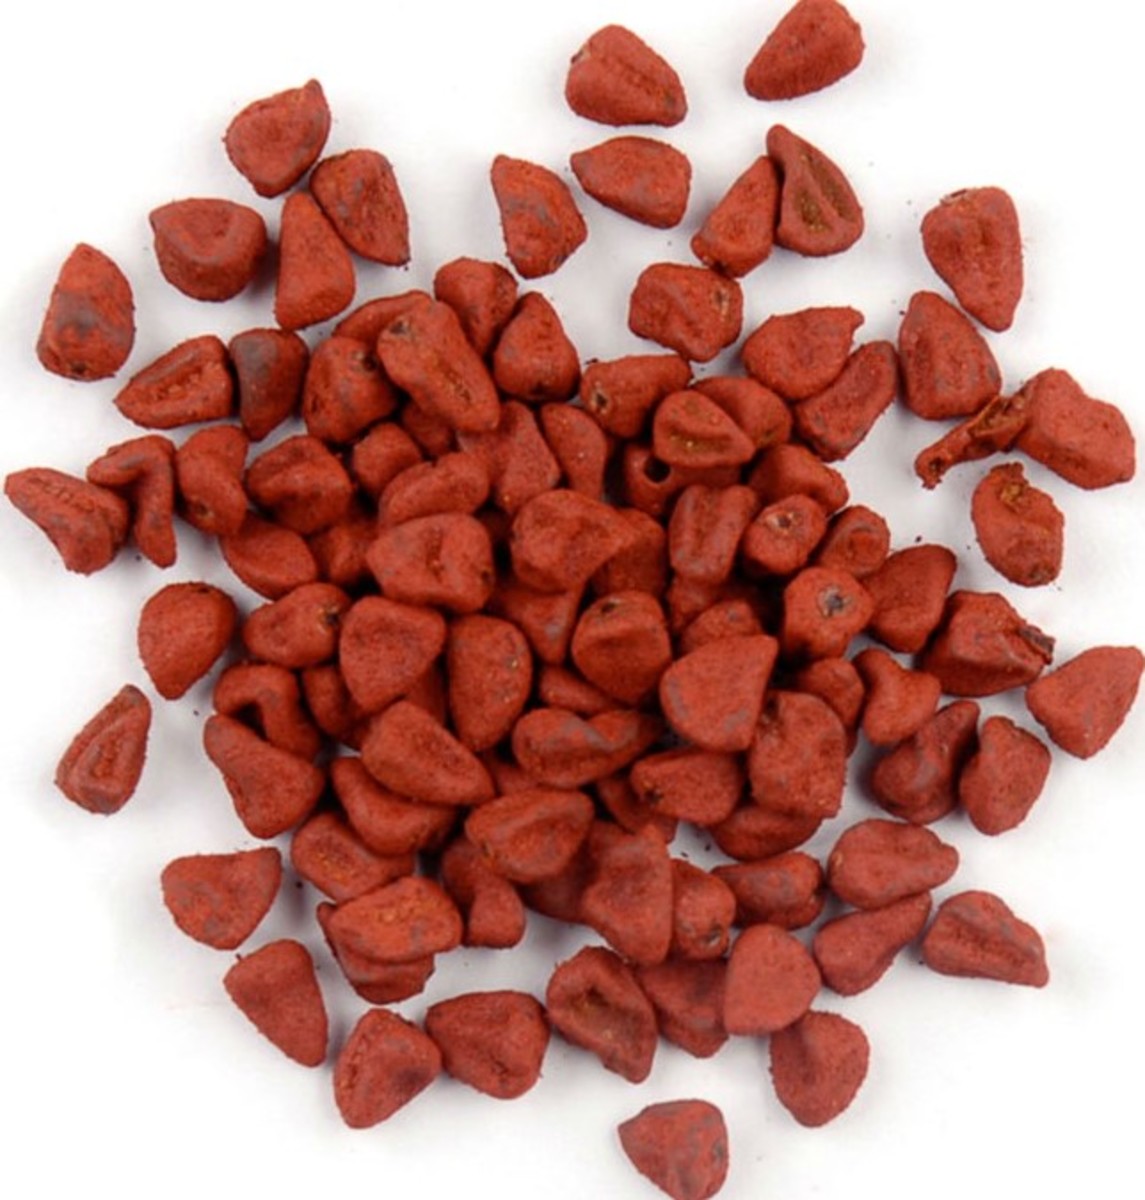 This is what annatto seeds  look like (aka achuete seeds in Tagalog).